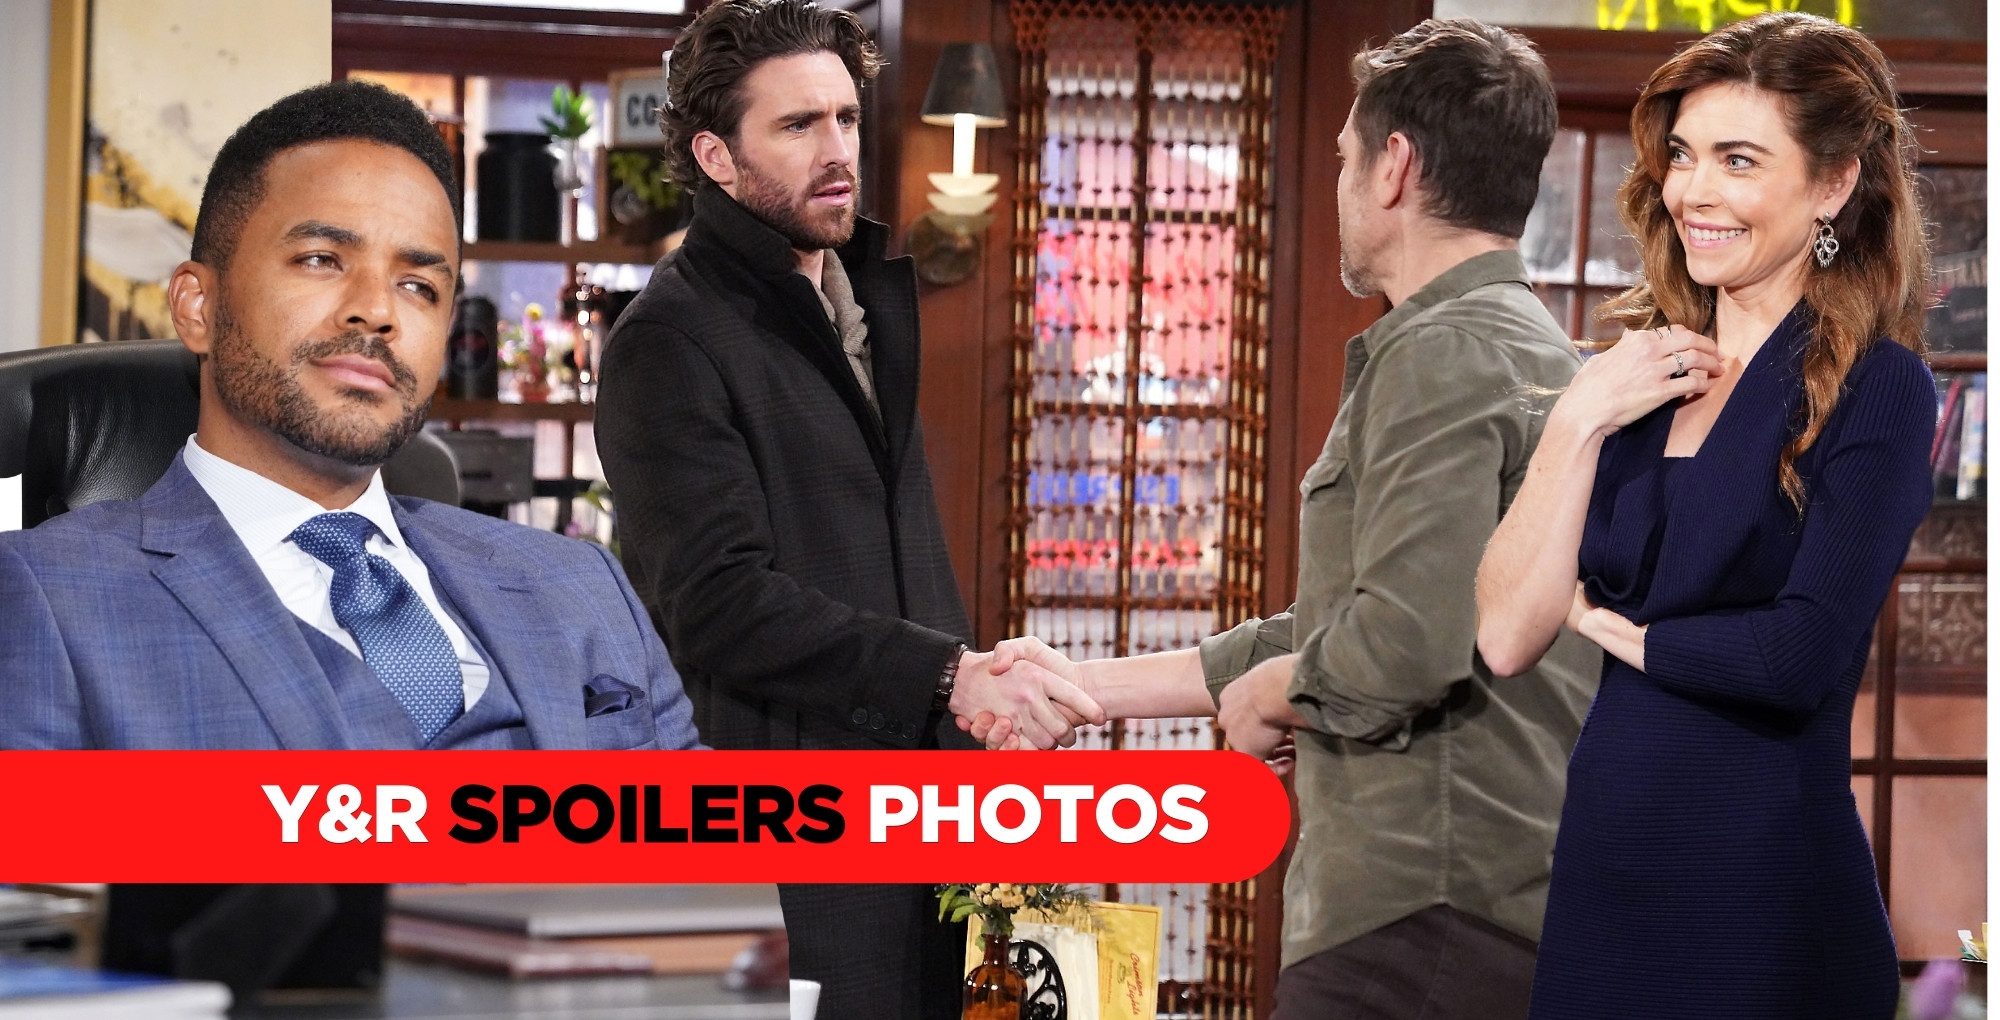 y&r spoilers photos for February 8